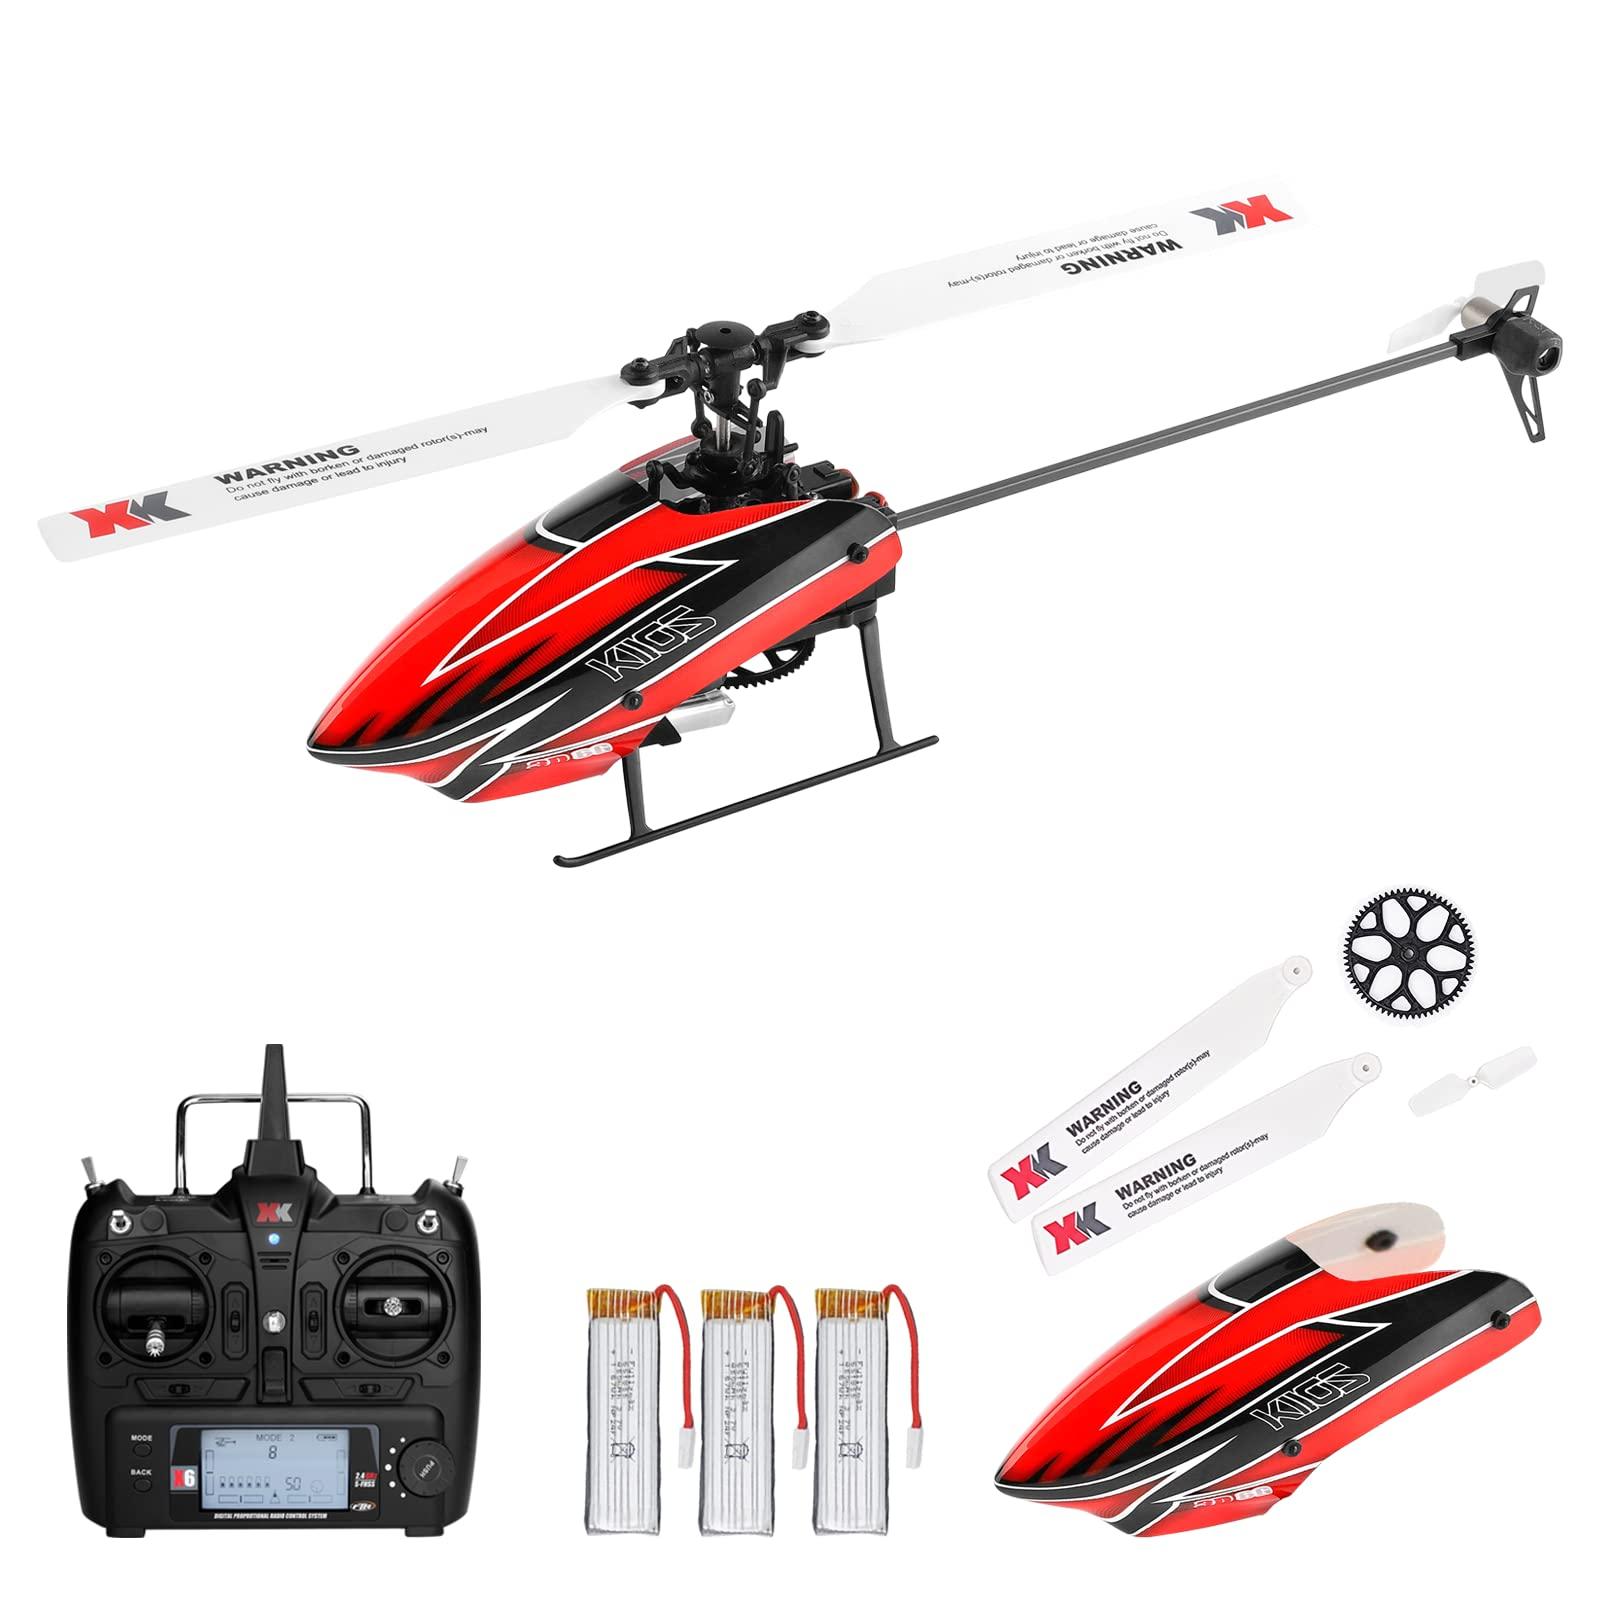 Wltoys Helicopter: Wltoys Helicopter: A Top Choice for RC Enthusiasts